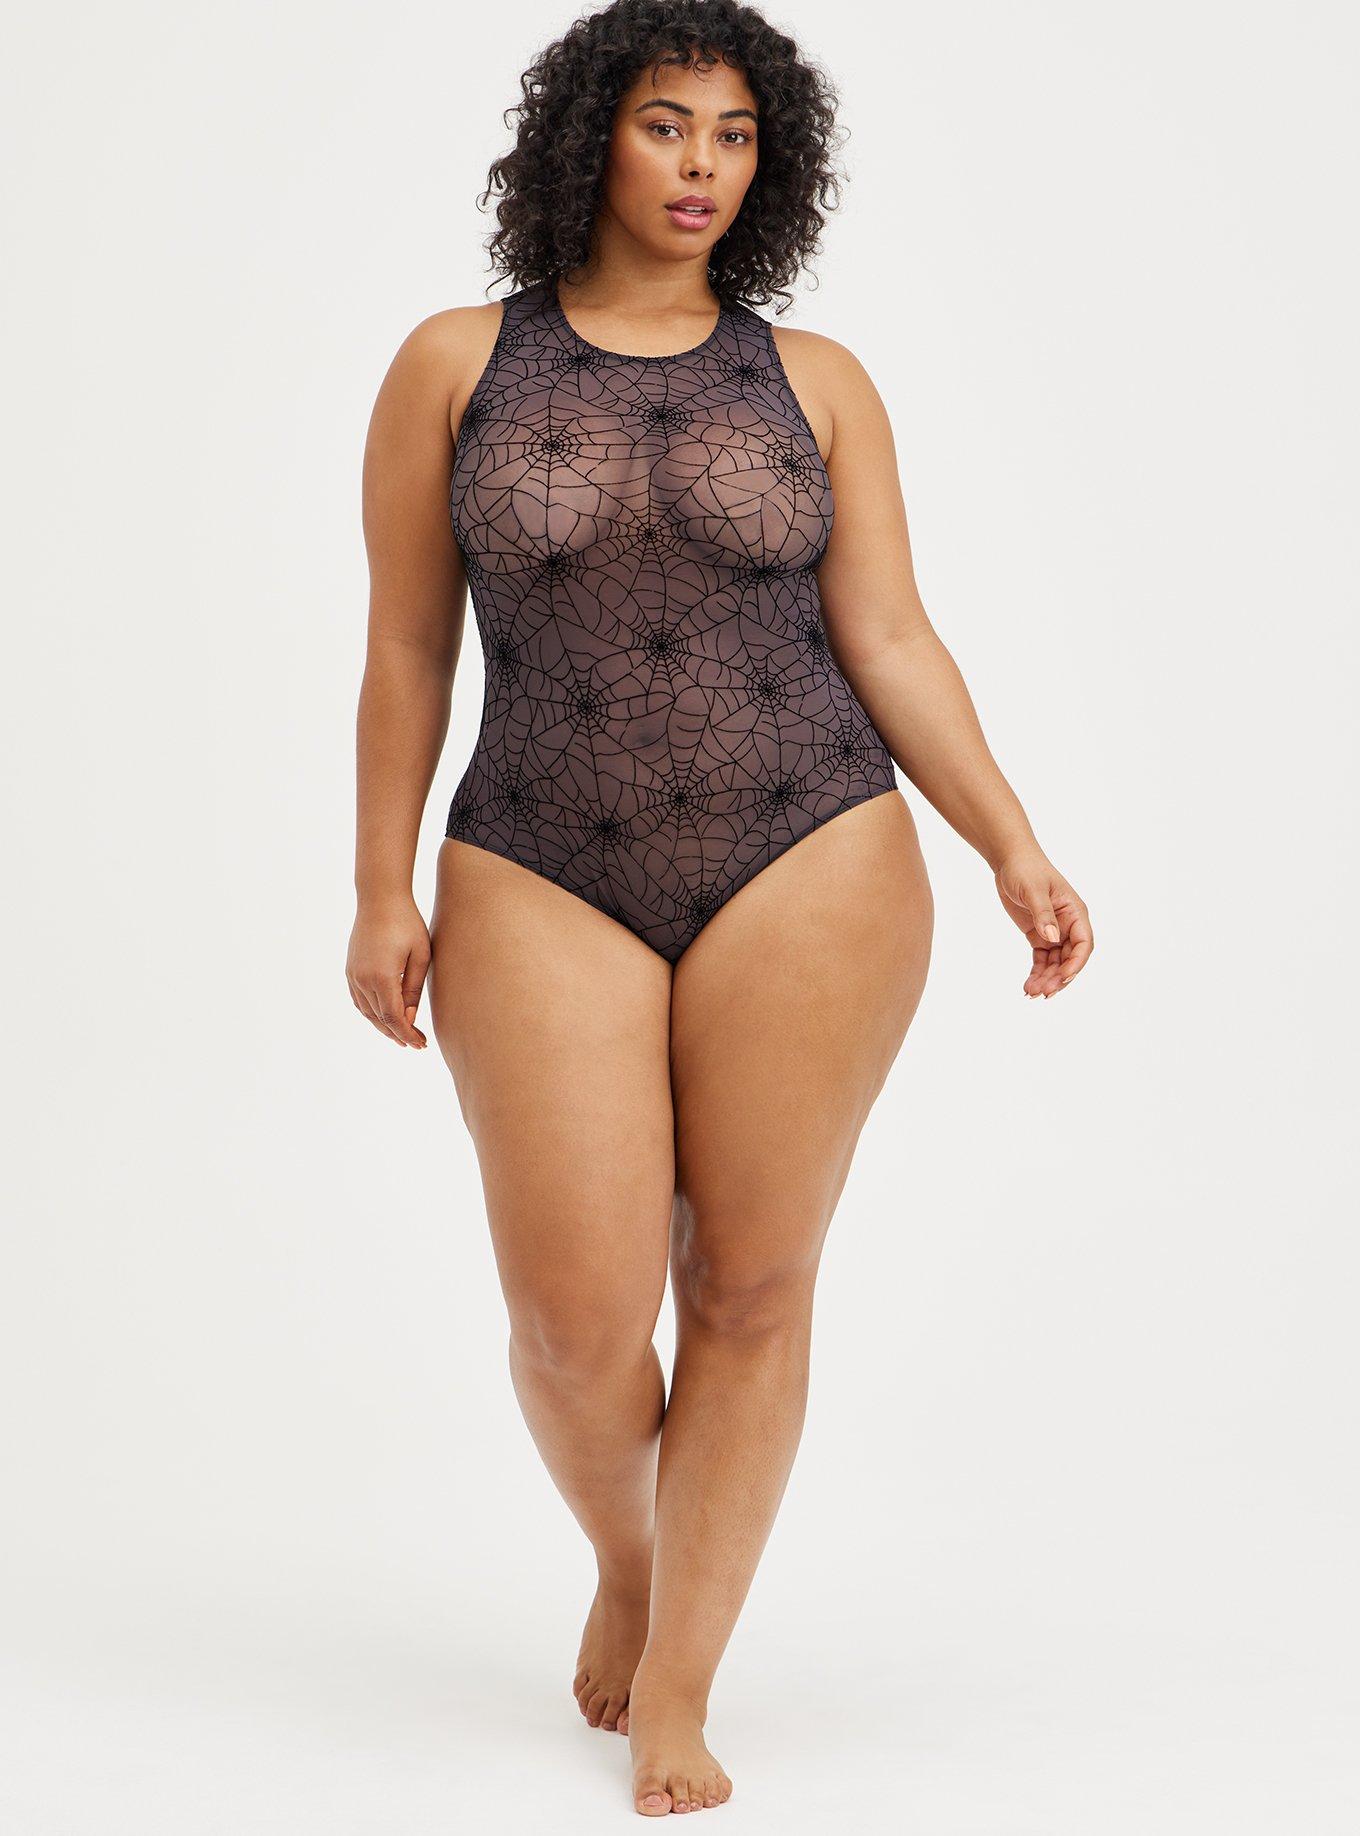 TORRID Ruffle Underwire Thong Bodysuit Pastel Butterfly Print Plus Size 3X  for sale online 